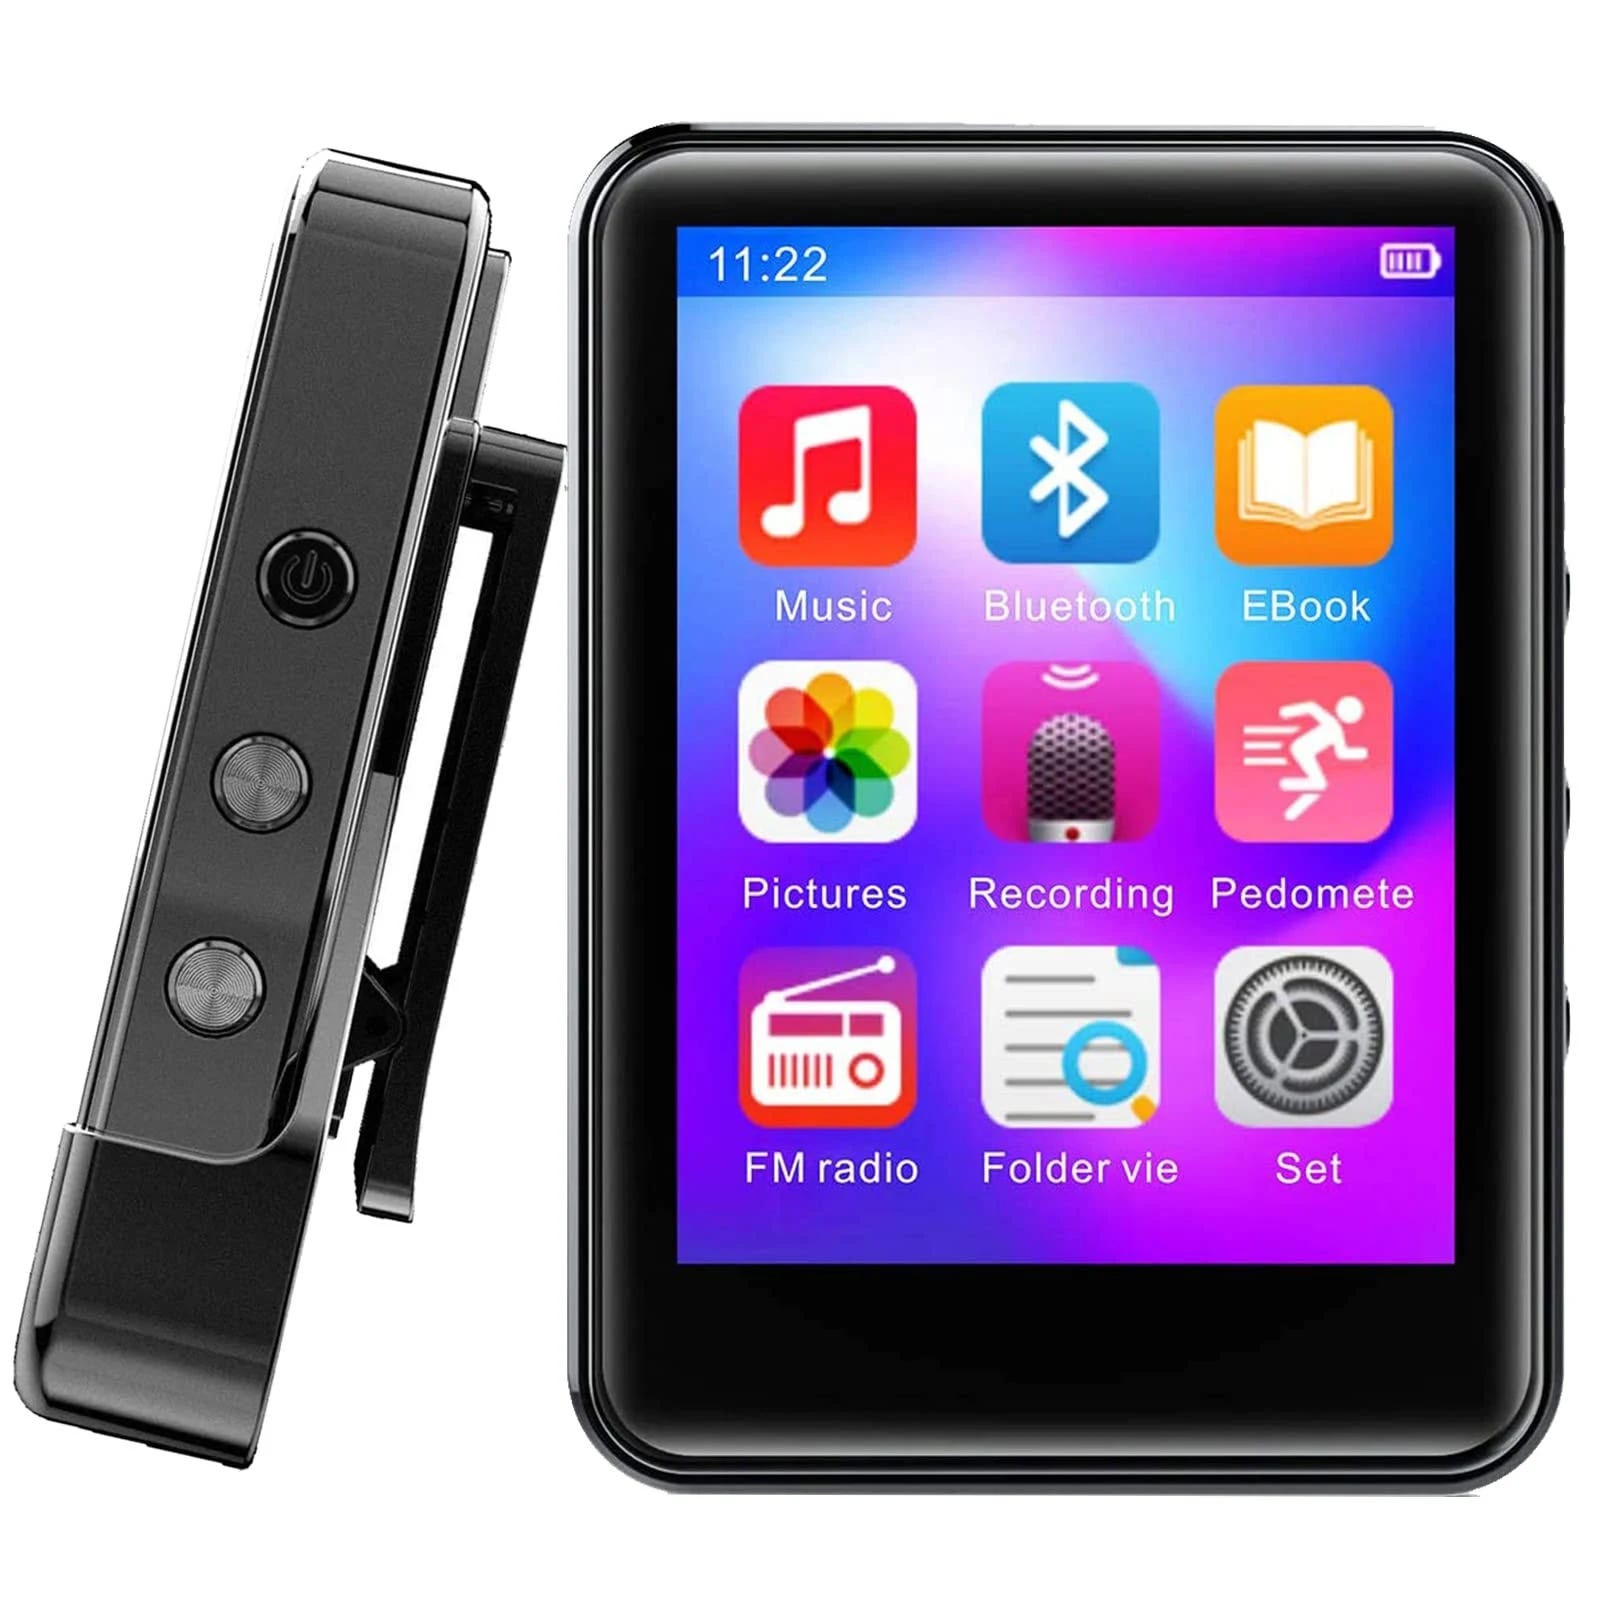 Fdy Bluetooth MP3 Player: Portable 32GB Music Player with Touch Screen and FM Radio | Image